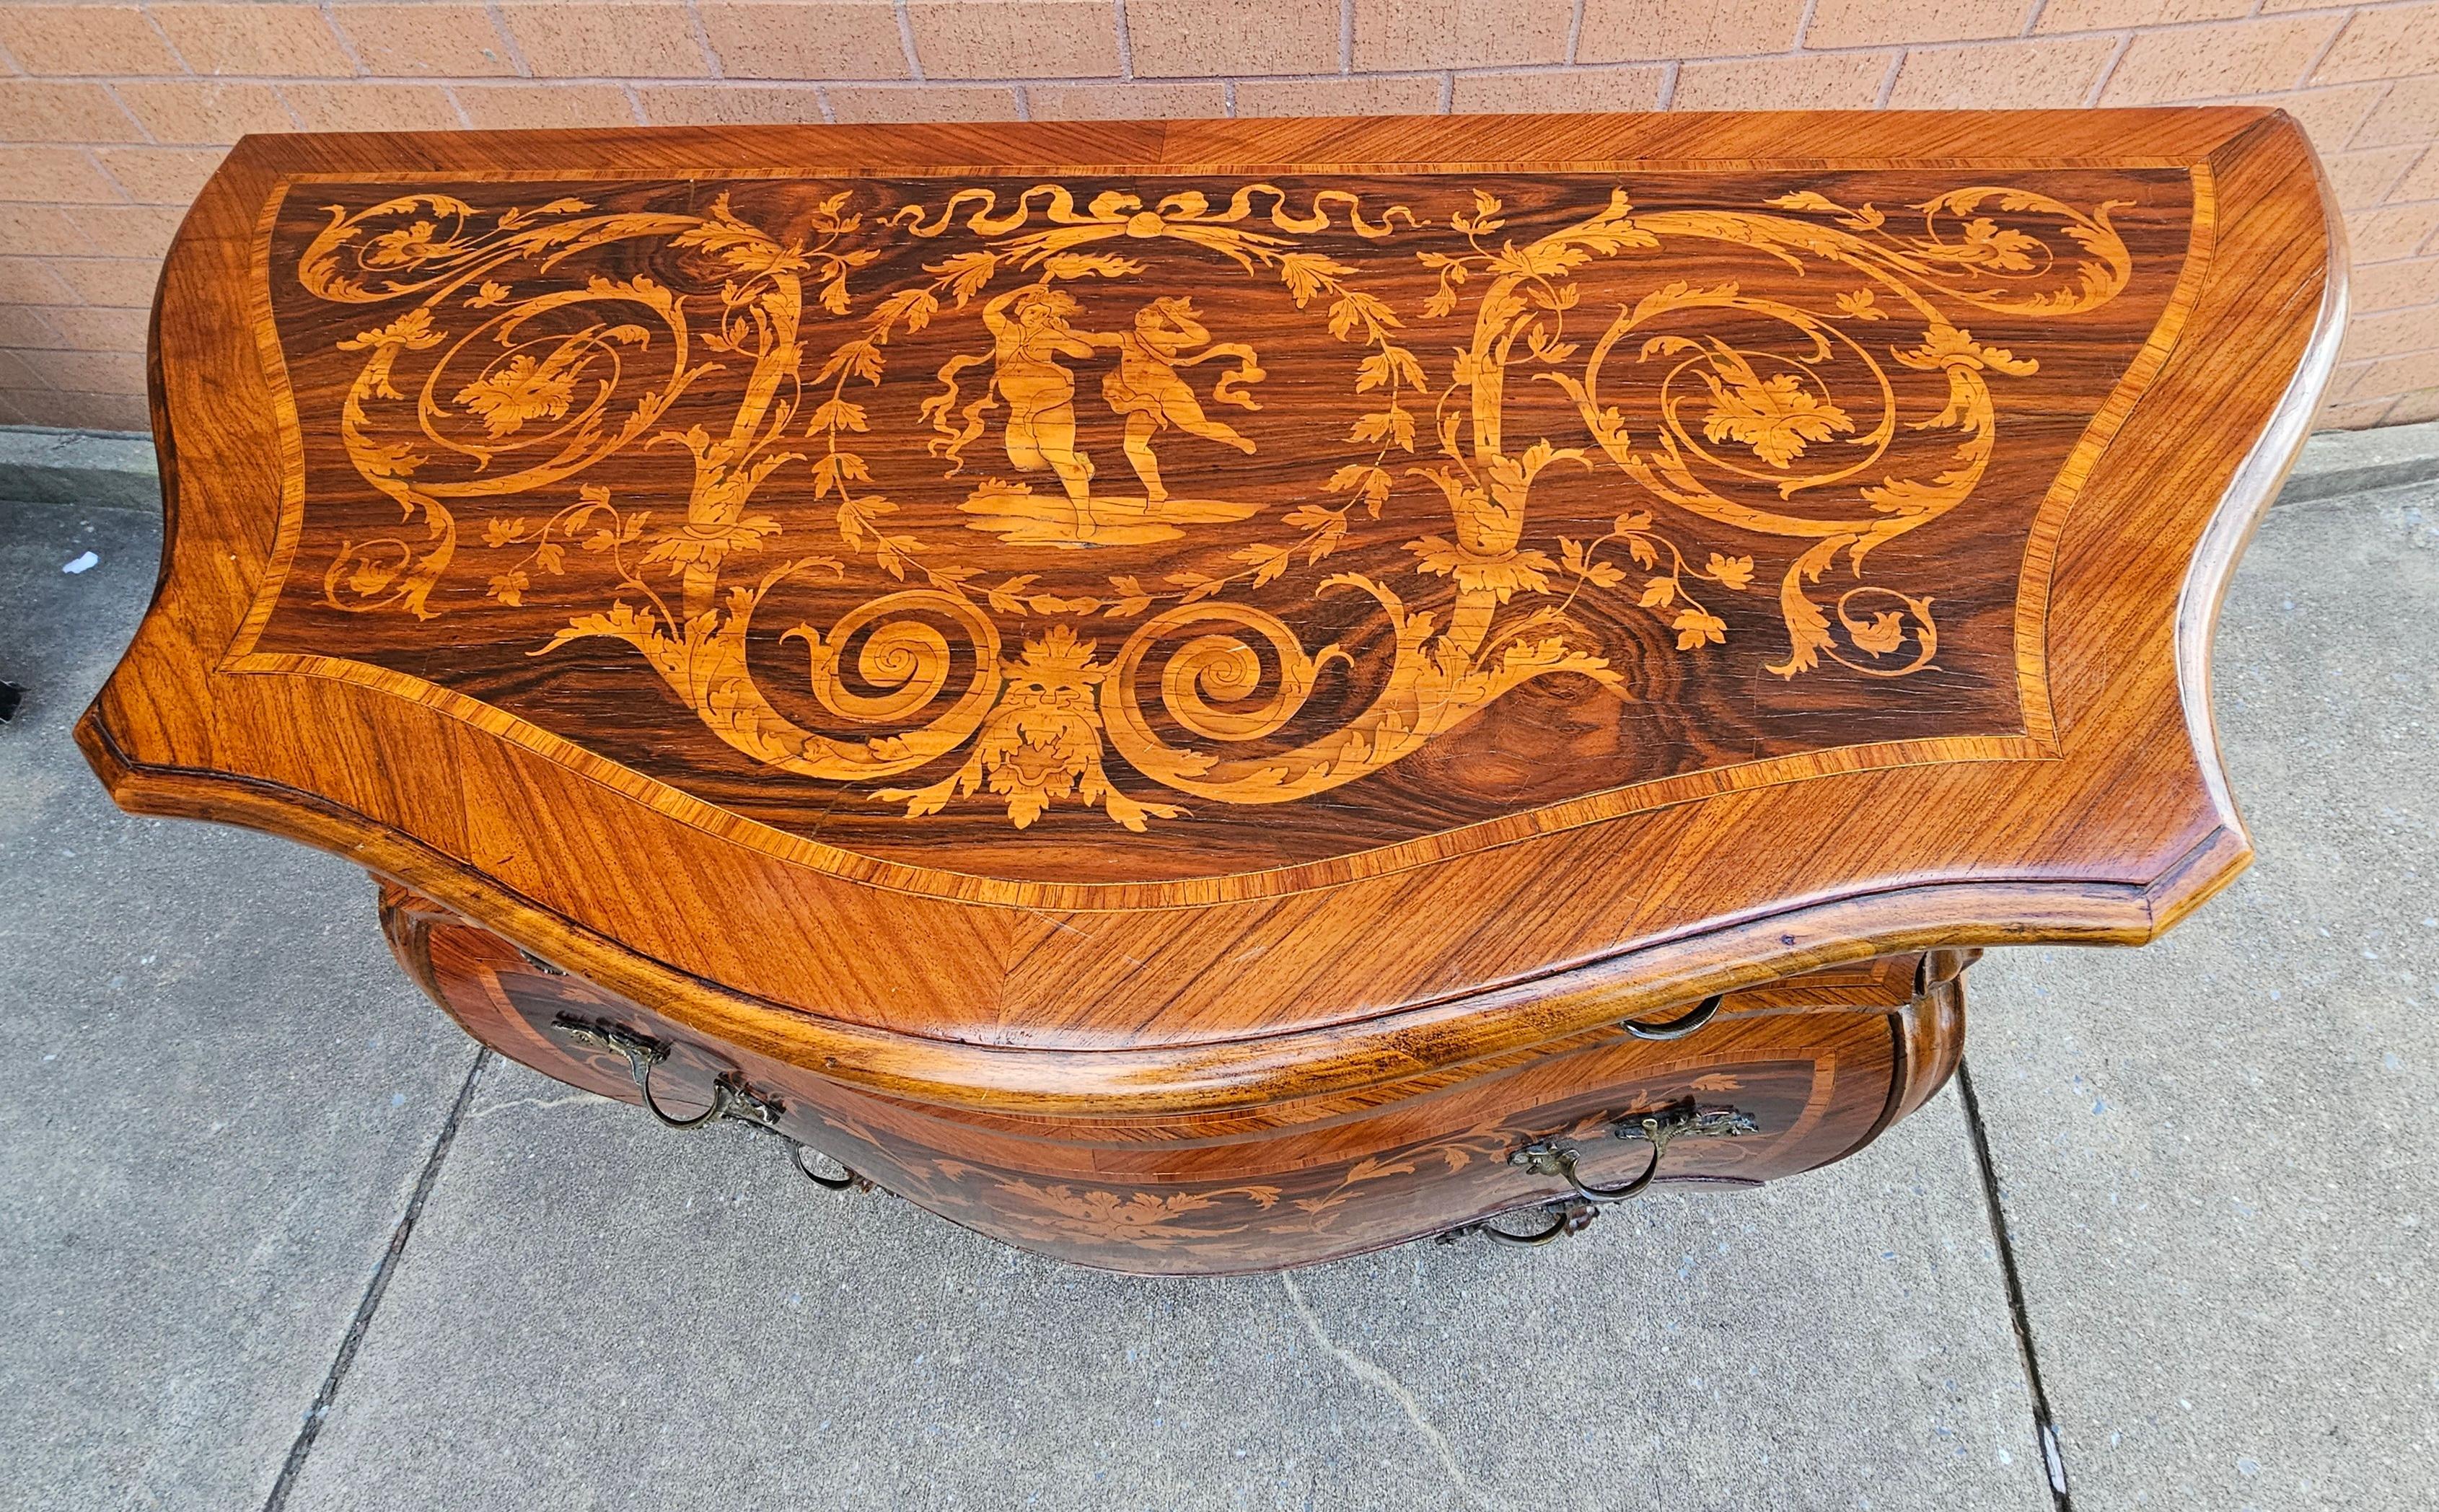 An Absolutely gorgeous late 19th Century Lombard Italian Rococo style Marquetry Kingwood,  Tulipwood and Satinwood Bombé Commode in great antique condition.  Three drawers with French style pulls. Measures 43.25